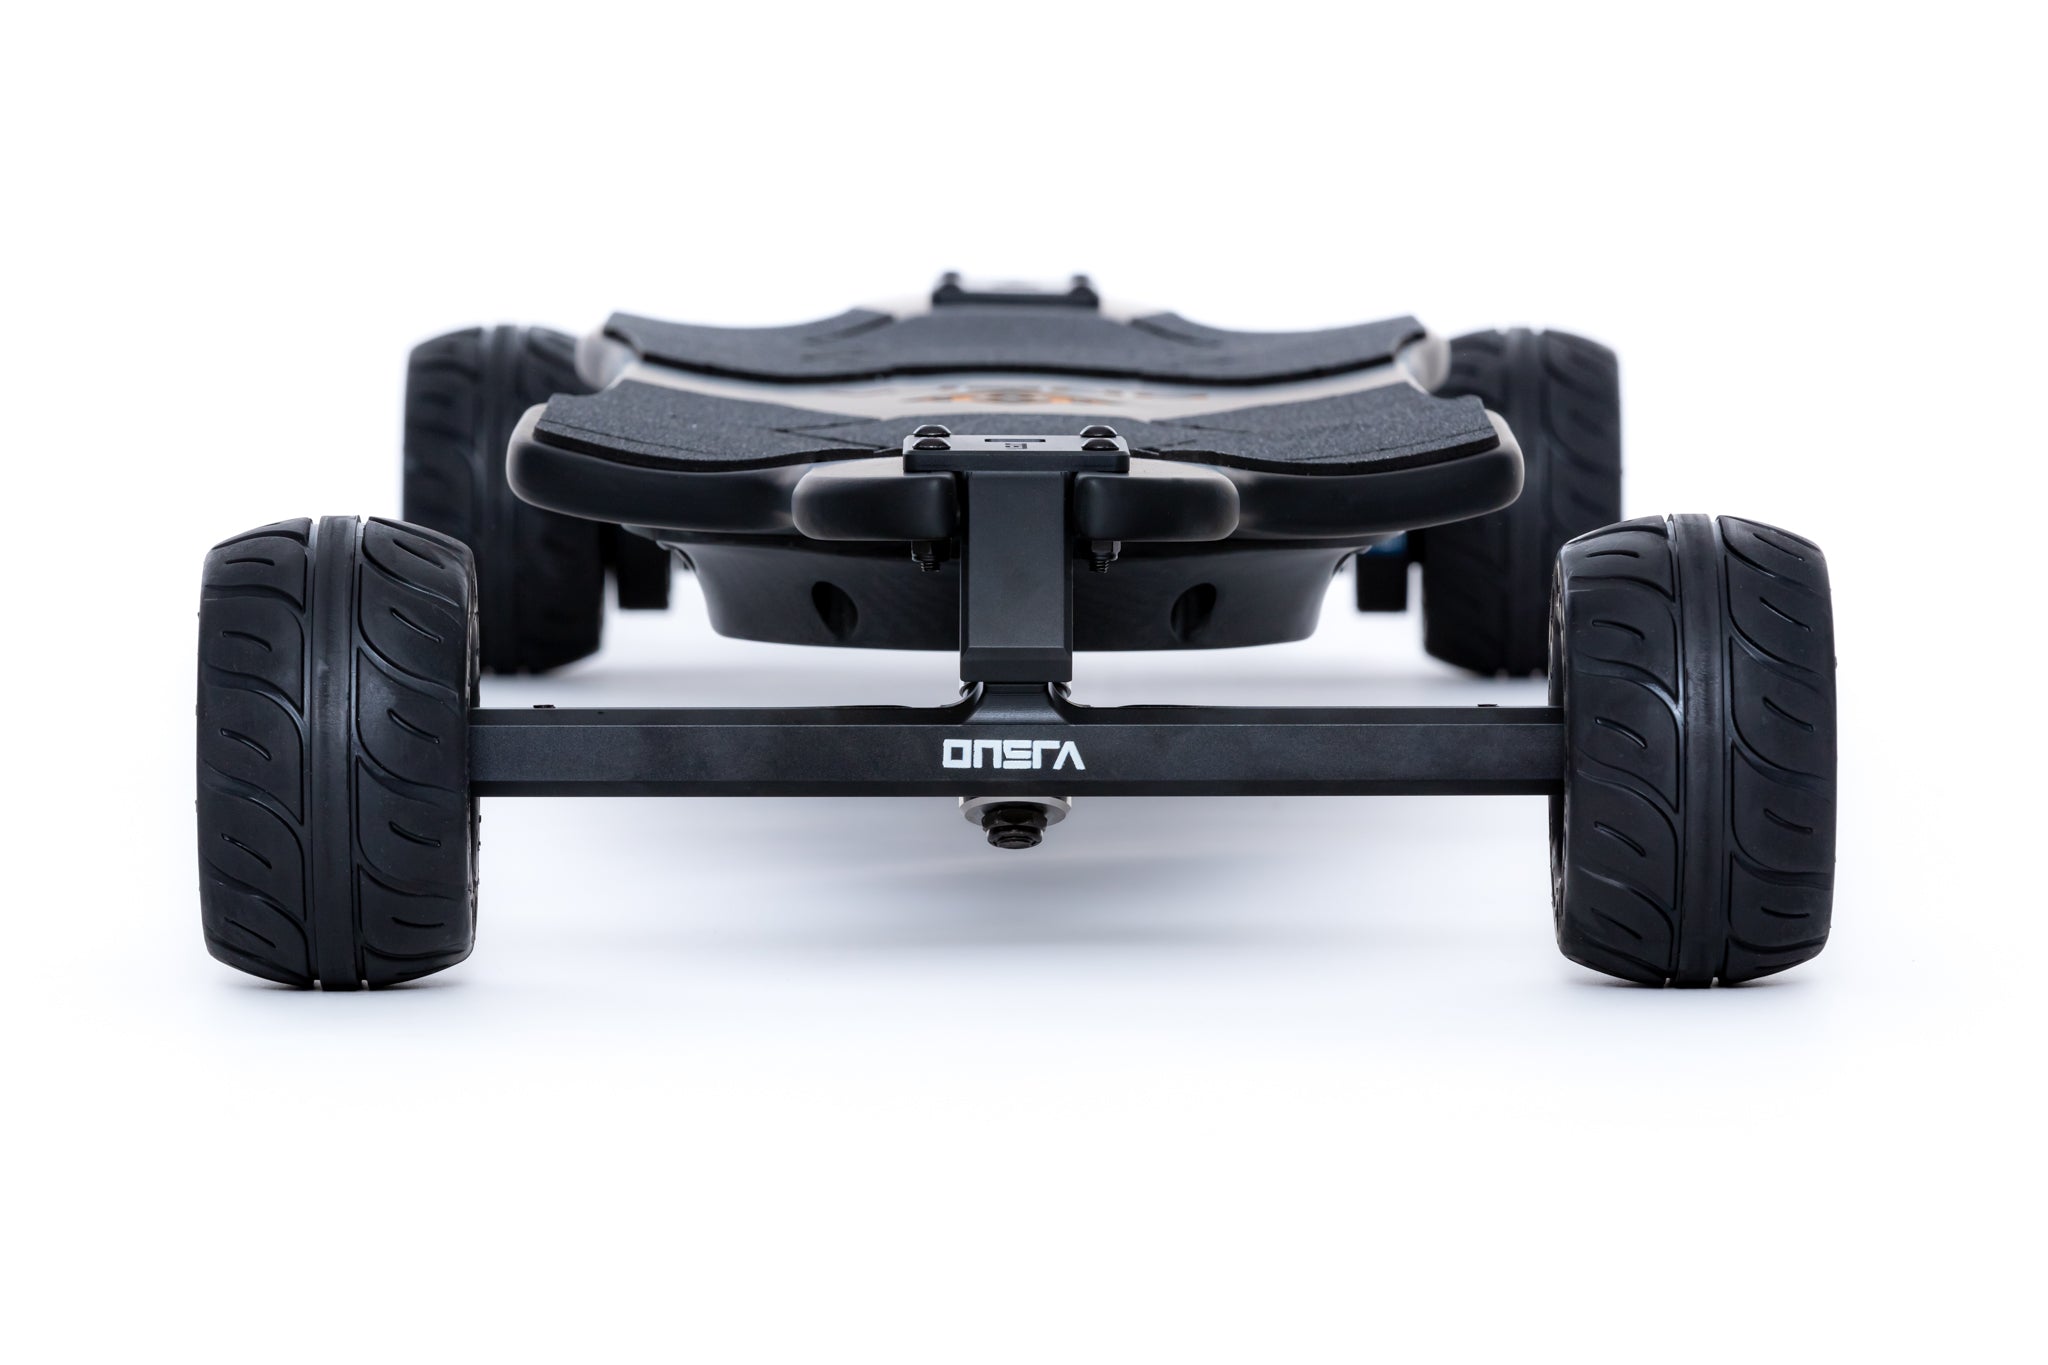 The Onsra Black Carve 3 electric skateboard features a sleek black design with a powerful electric motor, allowing for smooth and effortless cruising. Its durable construction and high-quality components make it a reliable option for both experienced and beginner riders. Its also has an upgraded Remote Control and a top speed of 25mph. 